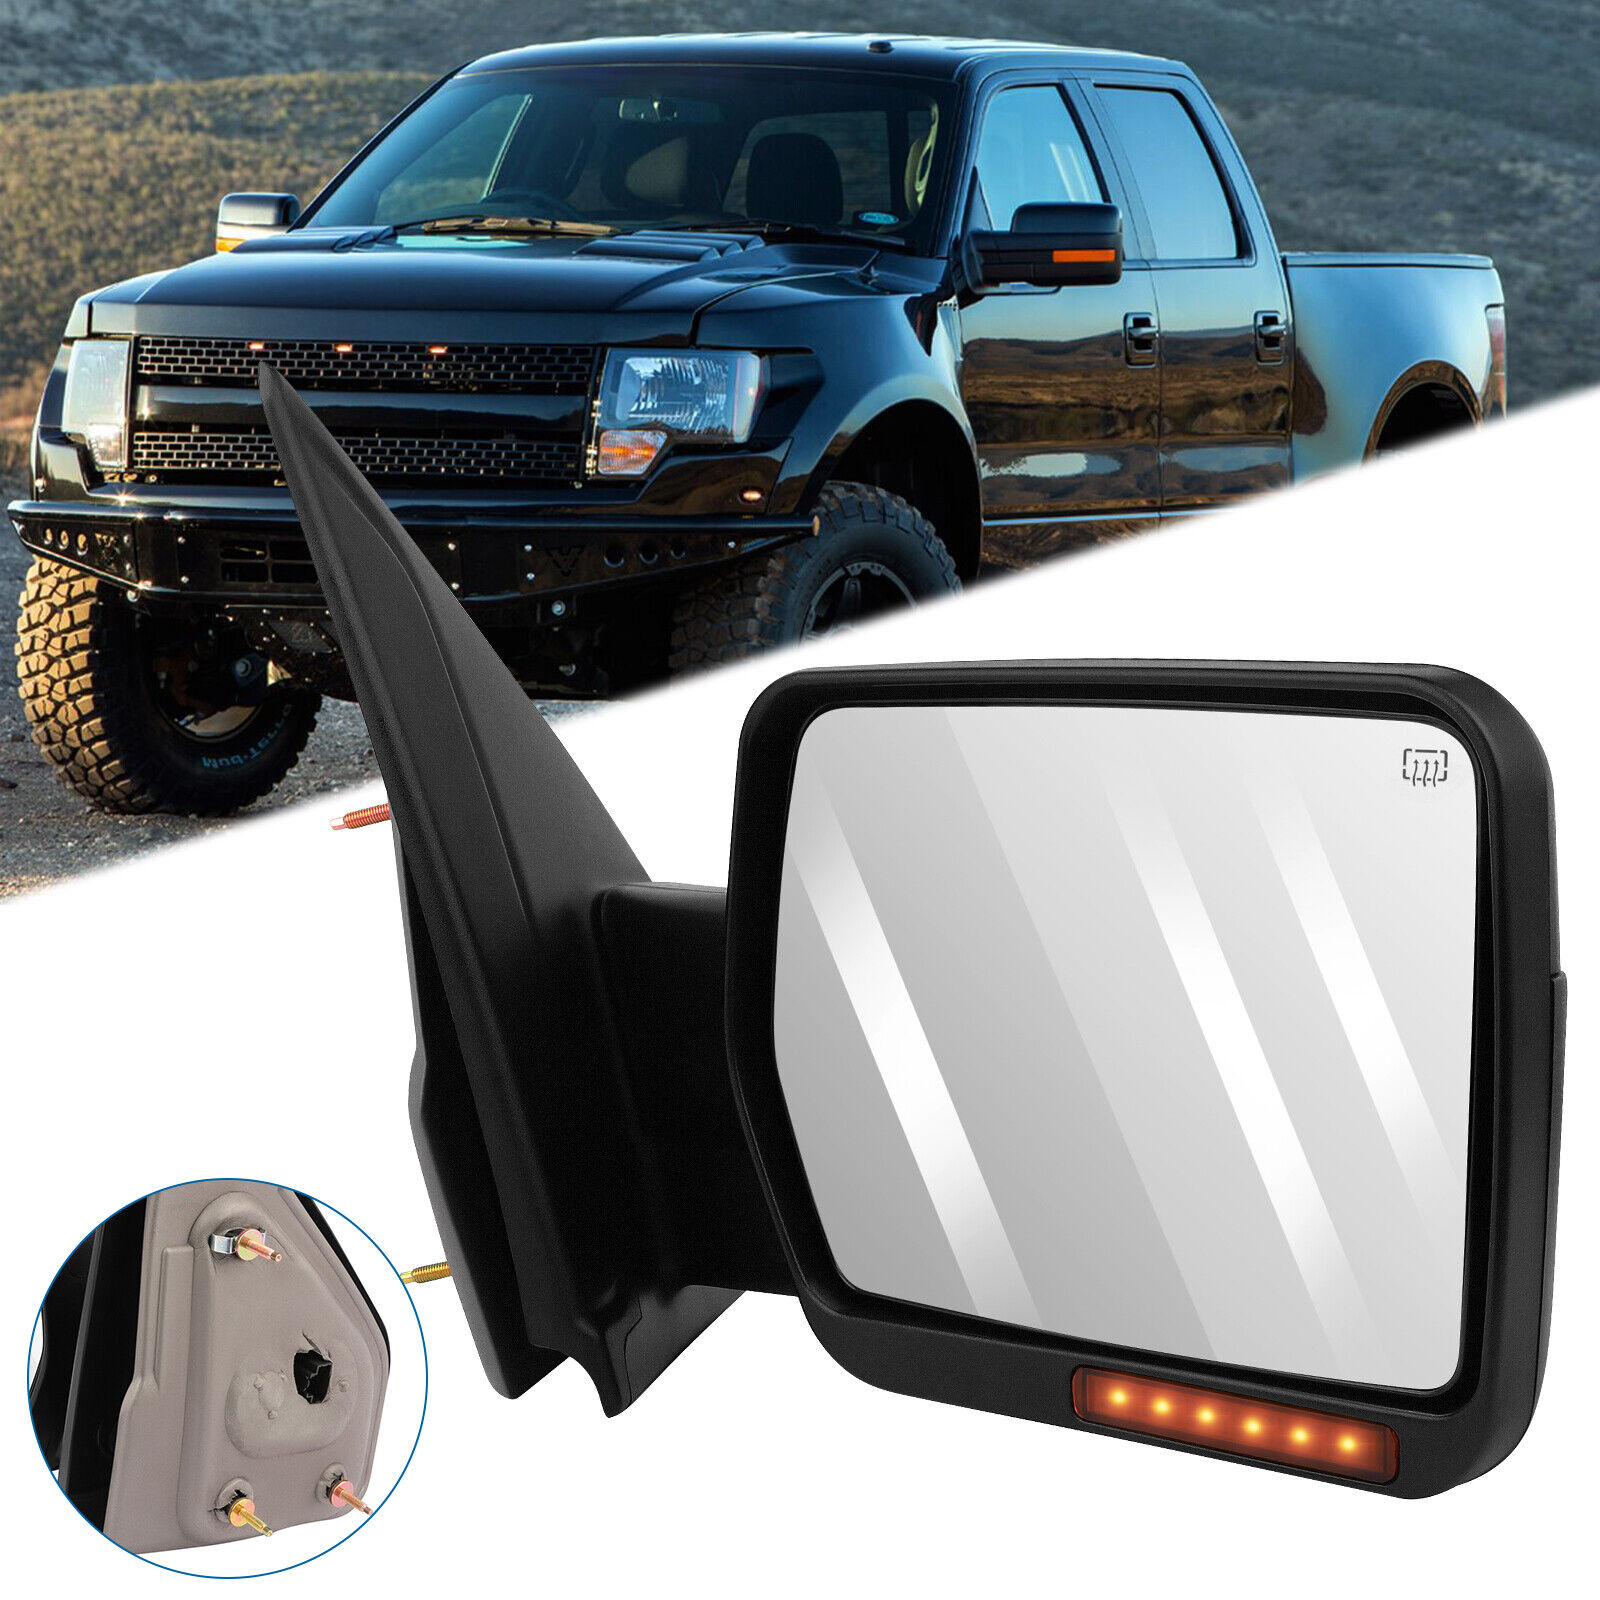 ✅ Passenger Power Heated Signal Right Side View Mirror For 04-14 Ford F150 Truck